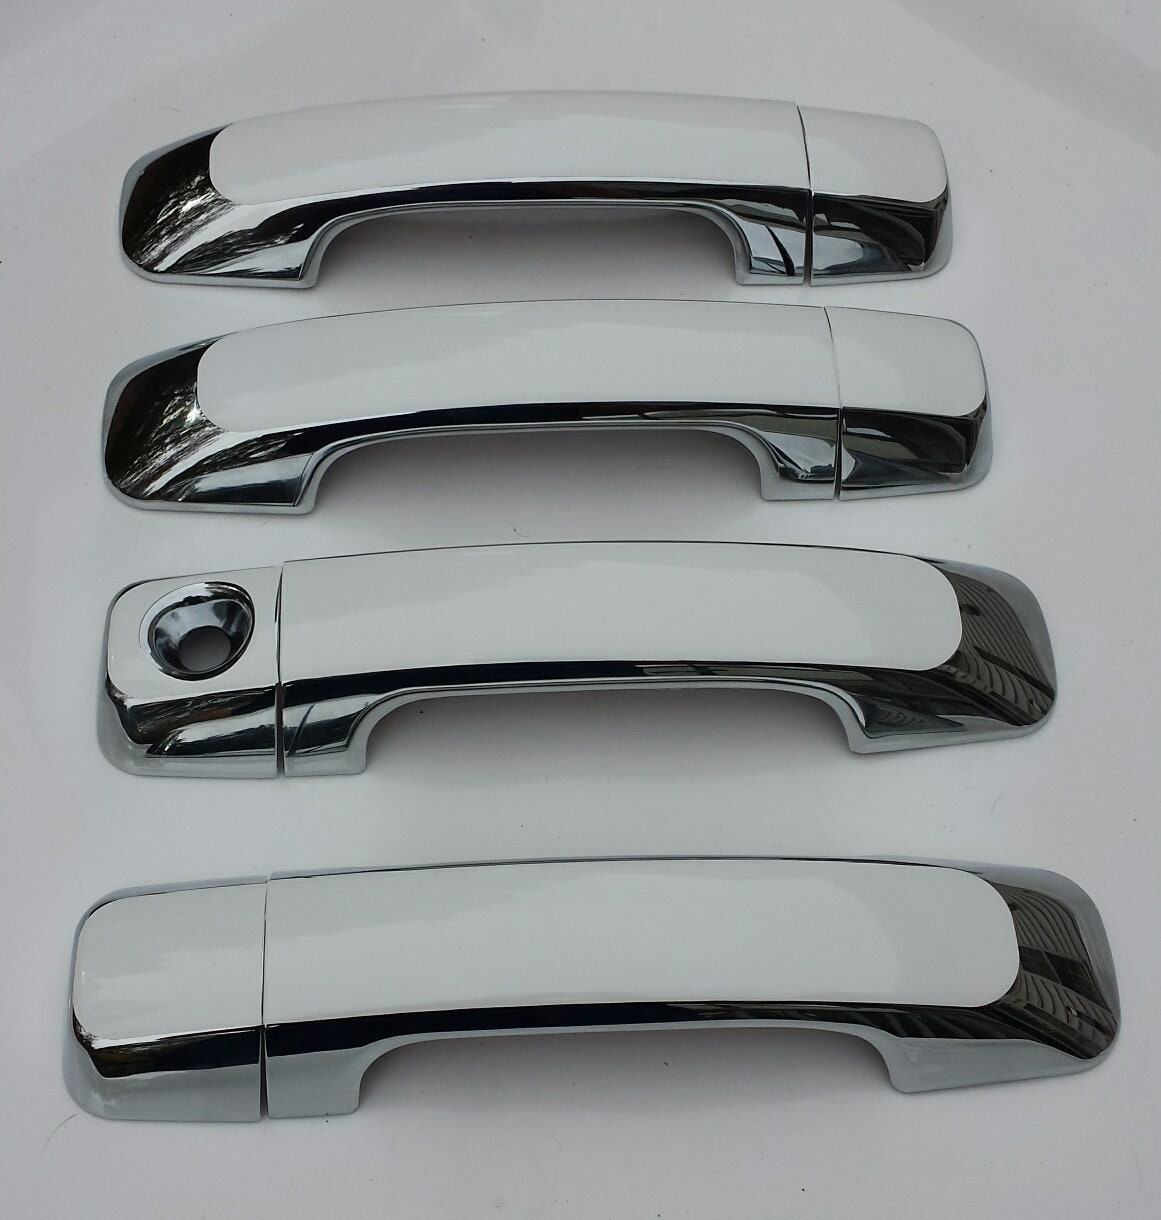 Full Set of Custom Black OR Chrome Door Handle Overlays / Covers For 2007 - 2022 Toyota Sequoia -- You Choose the Color of the Middle Insert